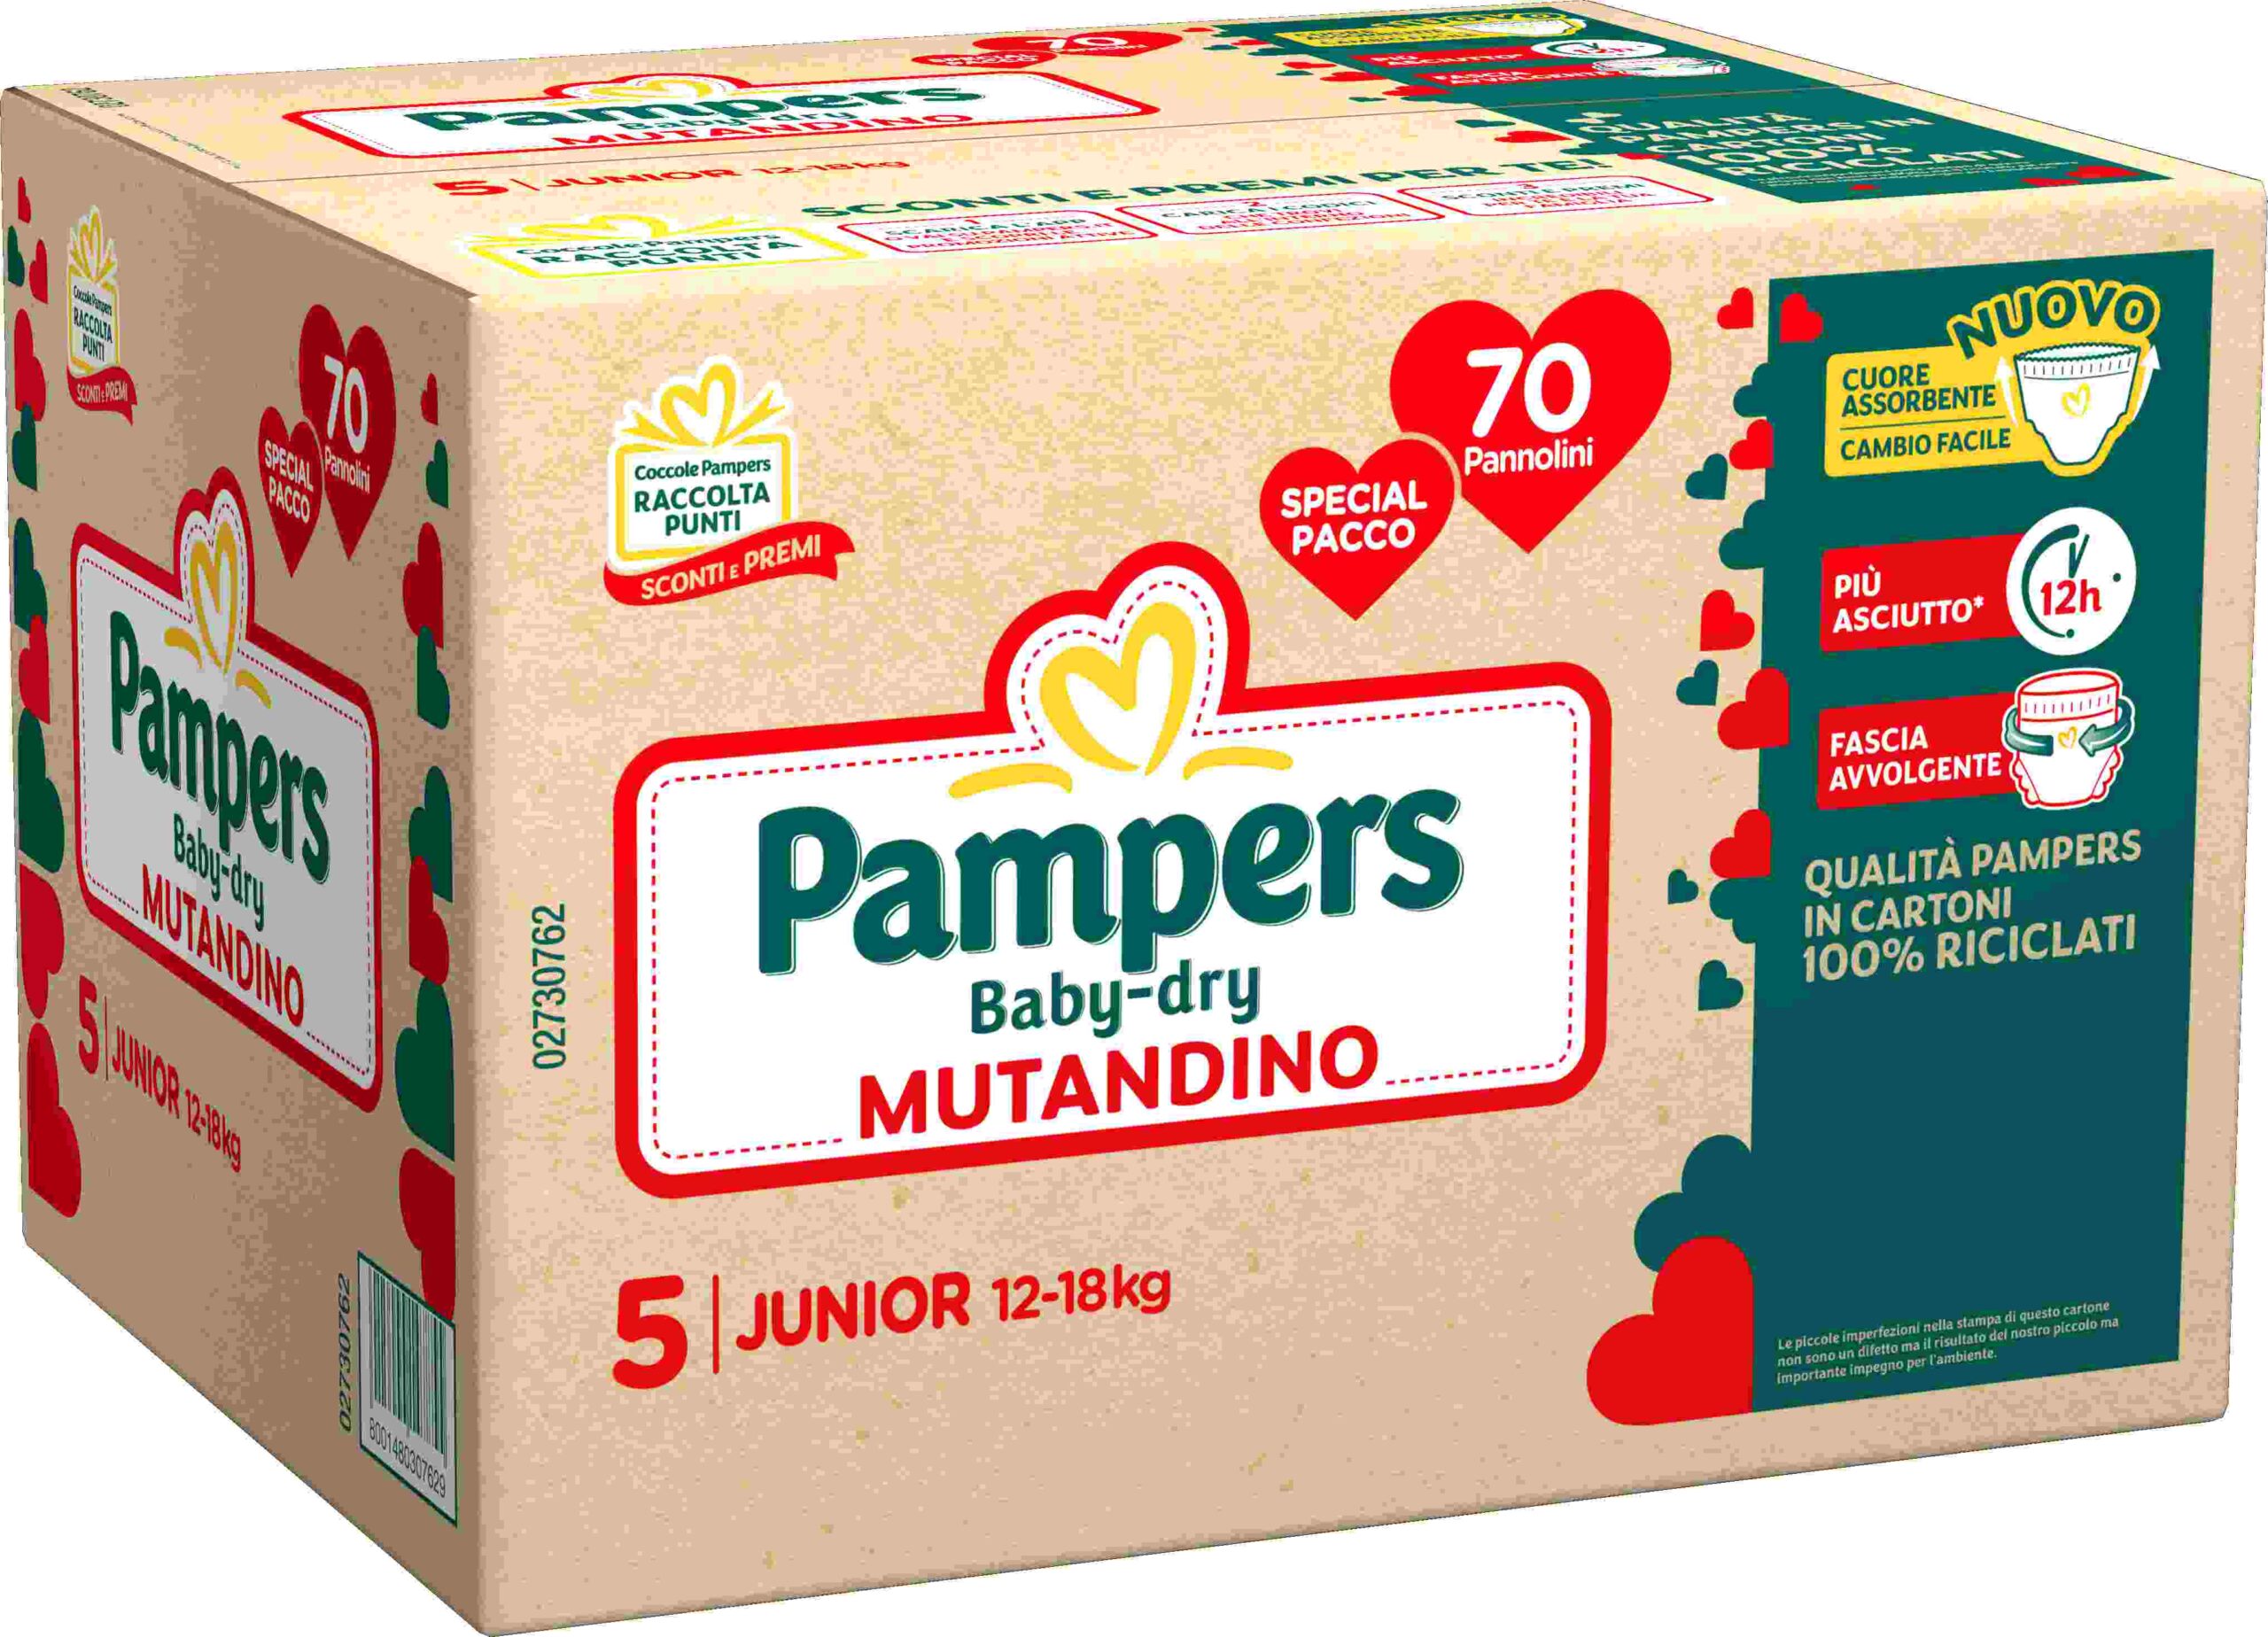 Pampers baby-dry mutandino special junior 70 pz - Pampers